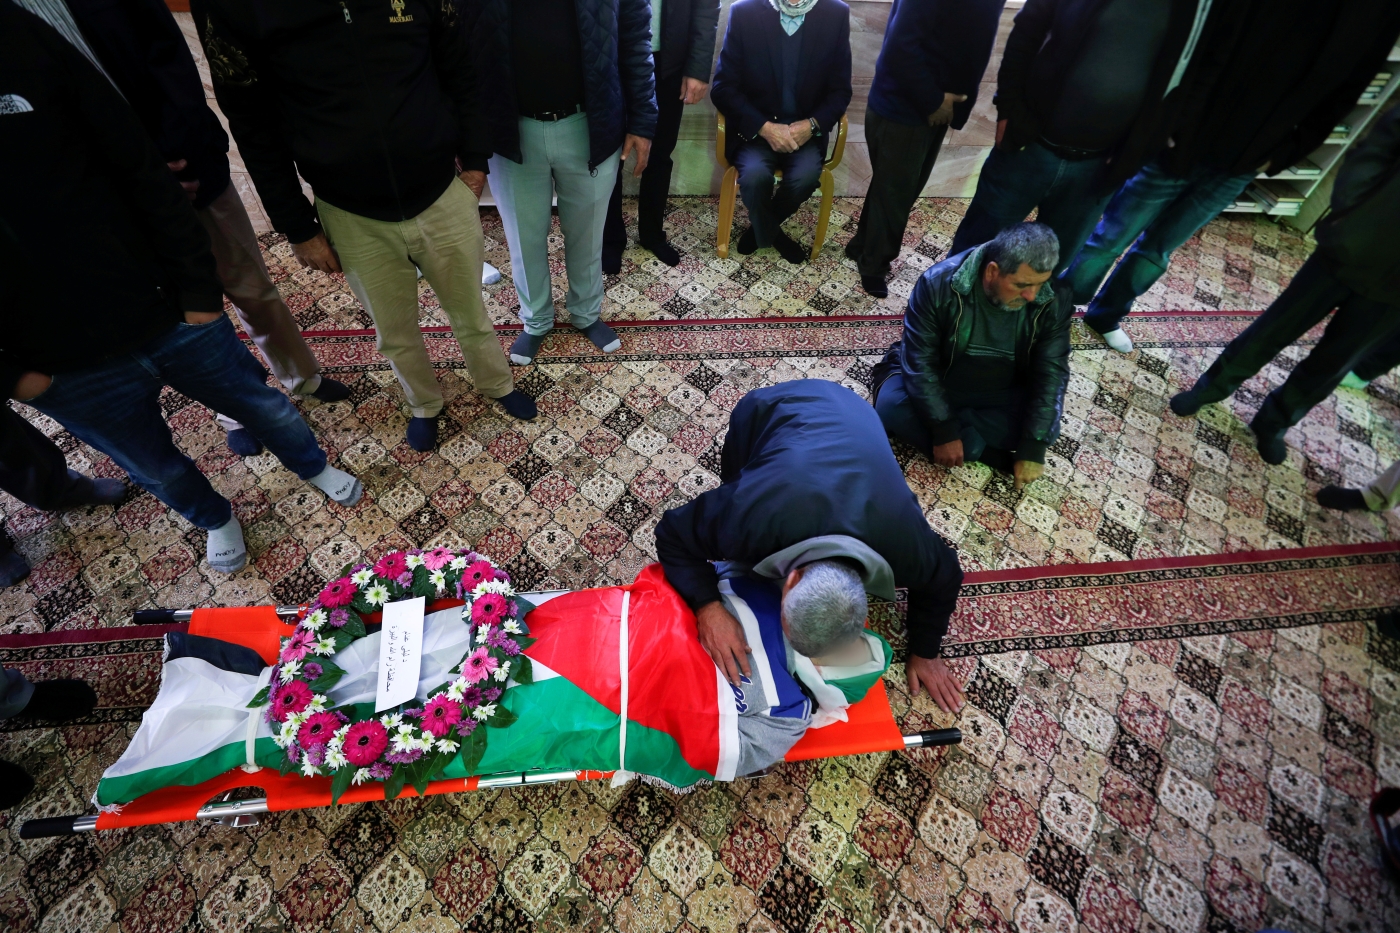 Mourners attend the funeral of Palestinian-American Omar Abdalmajeed Asaad, 79, on 13 January 2022 in Jiljilya village in the Israeli-occupied West Bank (Reuters)